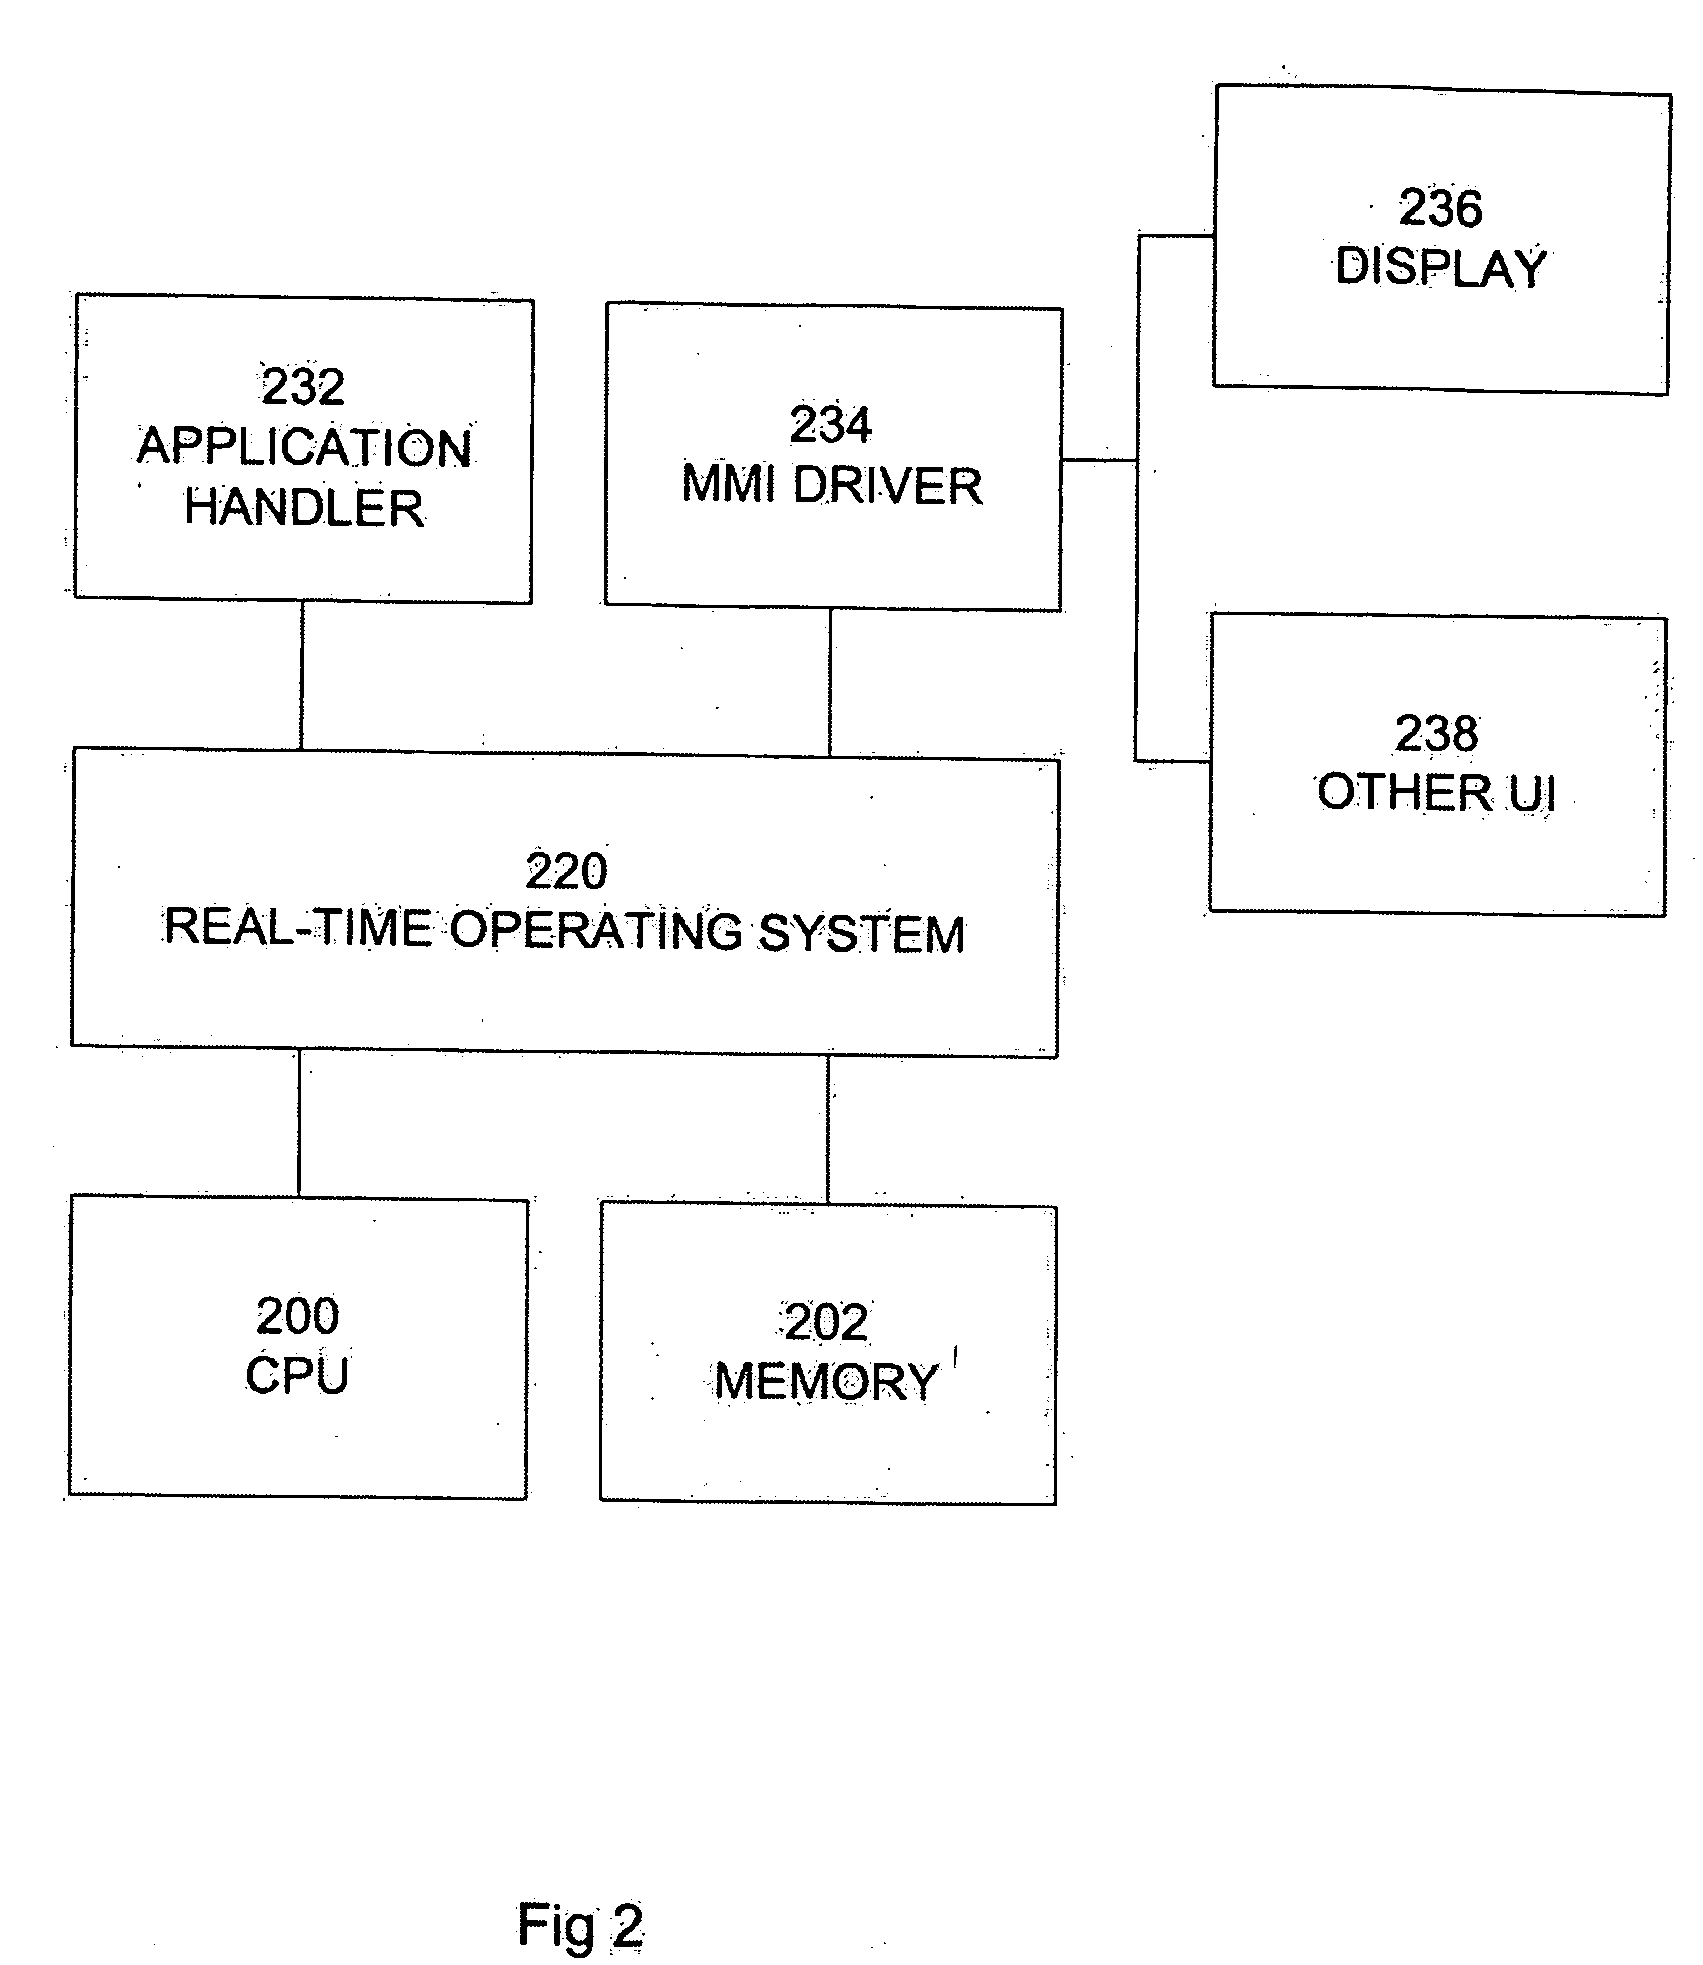 Electronic device having an imporoved user interface